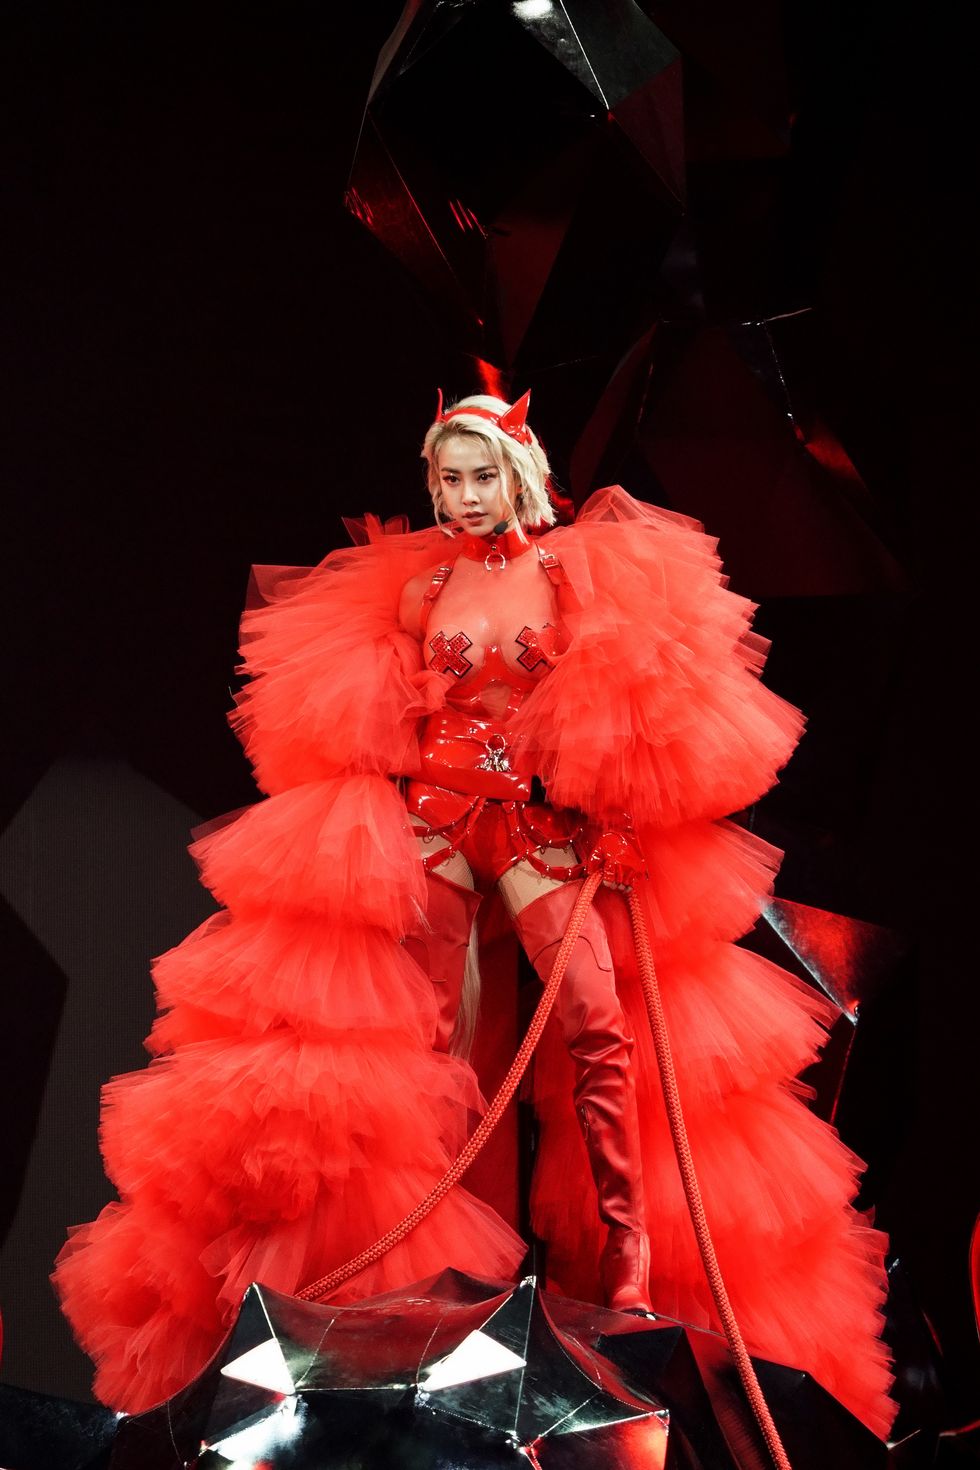 Red, Performance, Fashion, Pink, Performing arts, Performance art, Stage, Event, Neo-burlesque, Dance, 